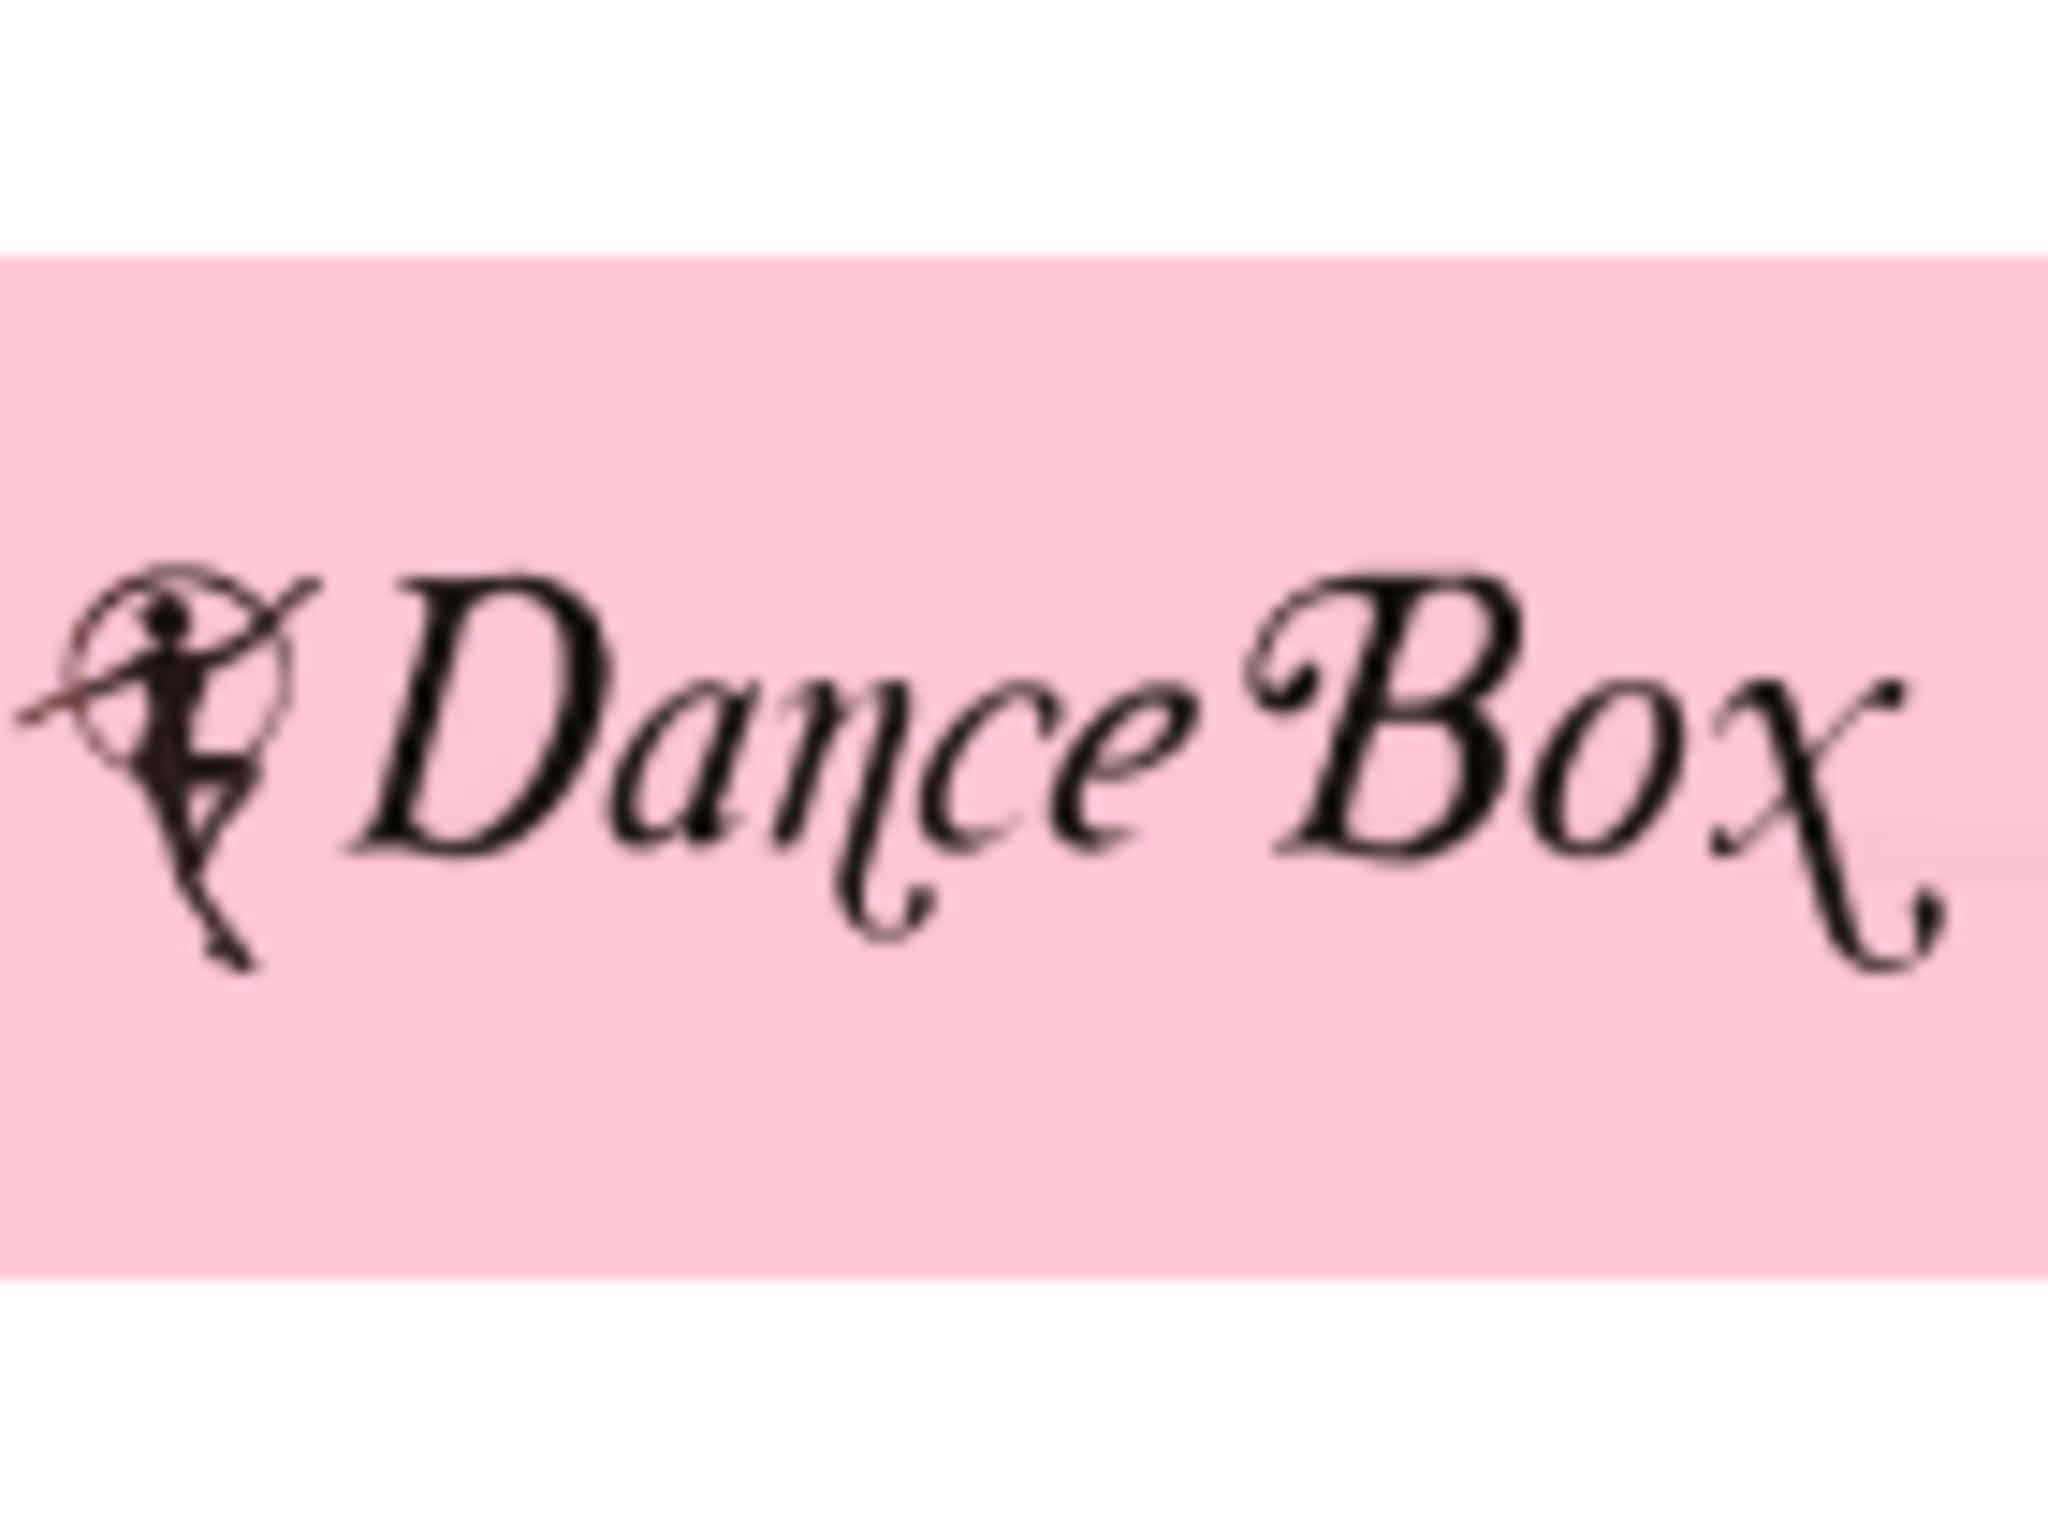 photo Dance Box Discount Stores The